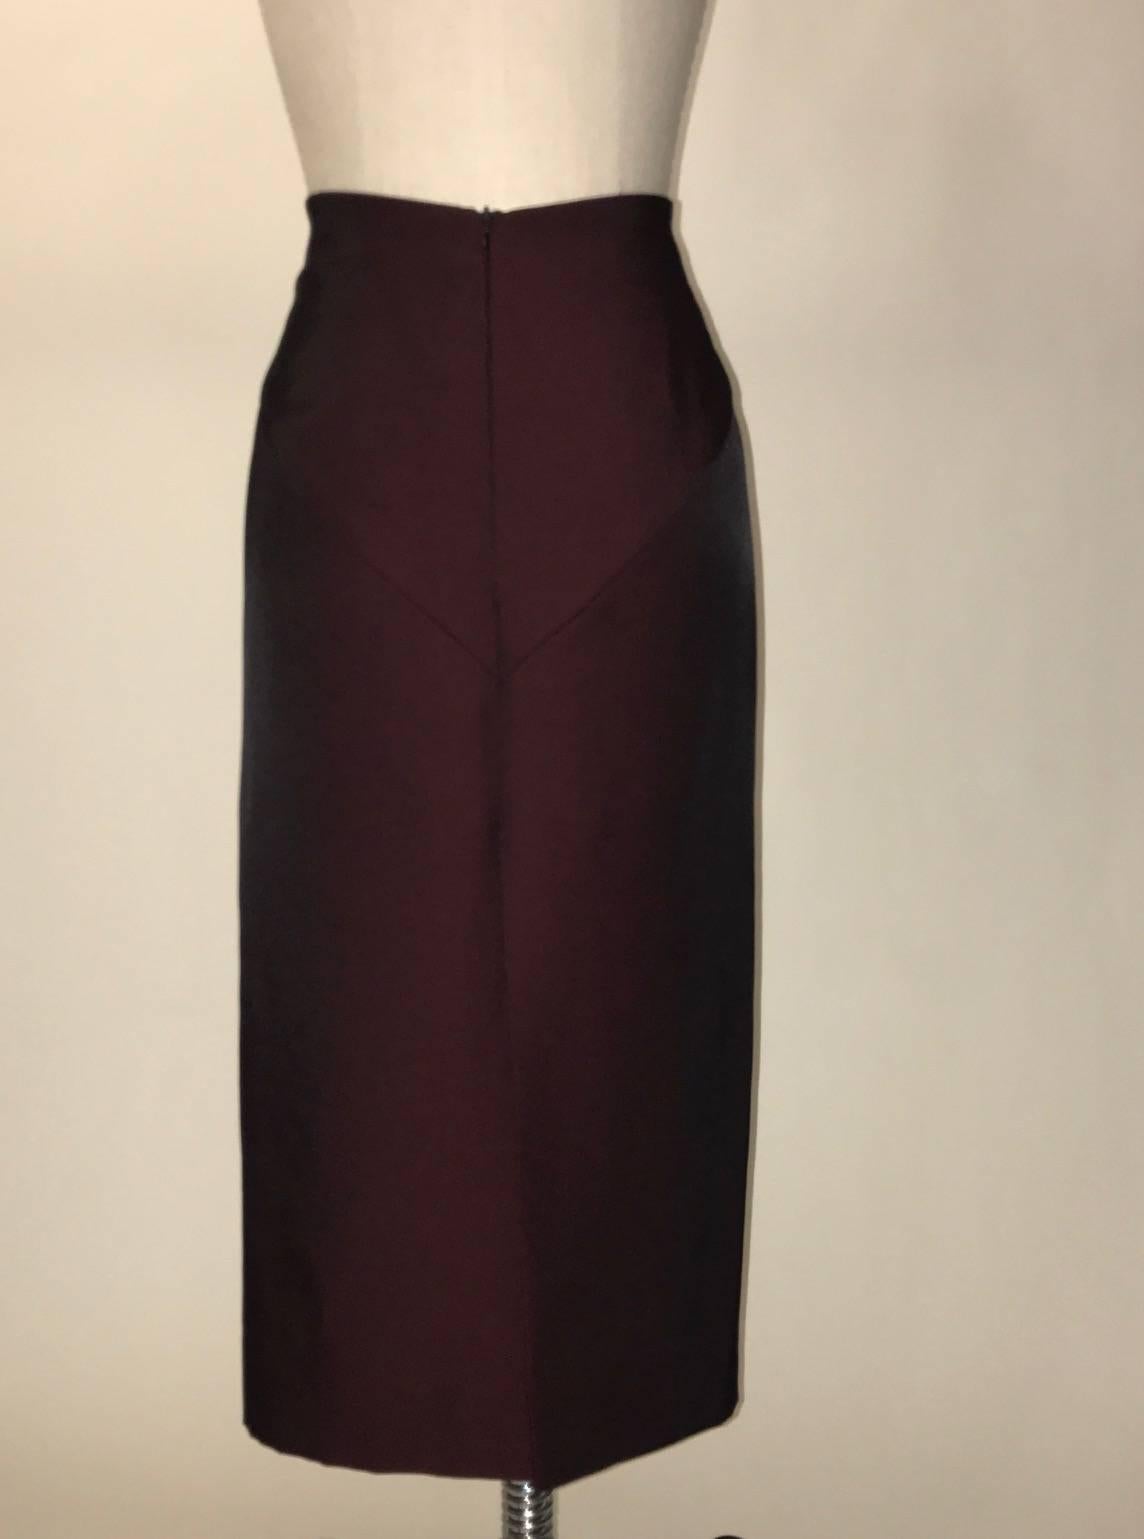 Alexander McQueen midi length pencil skirt in an interwoven maroon and black textile. Yoke detail at front and back waist. Slit at center back. Zipper closure at center back. 

Fabric content unknown, feels like a synthetic blend.
Fully lined in